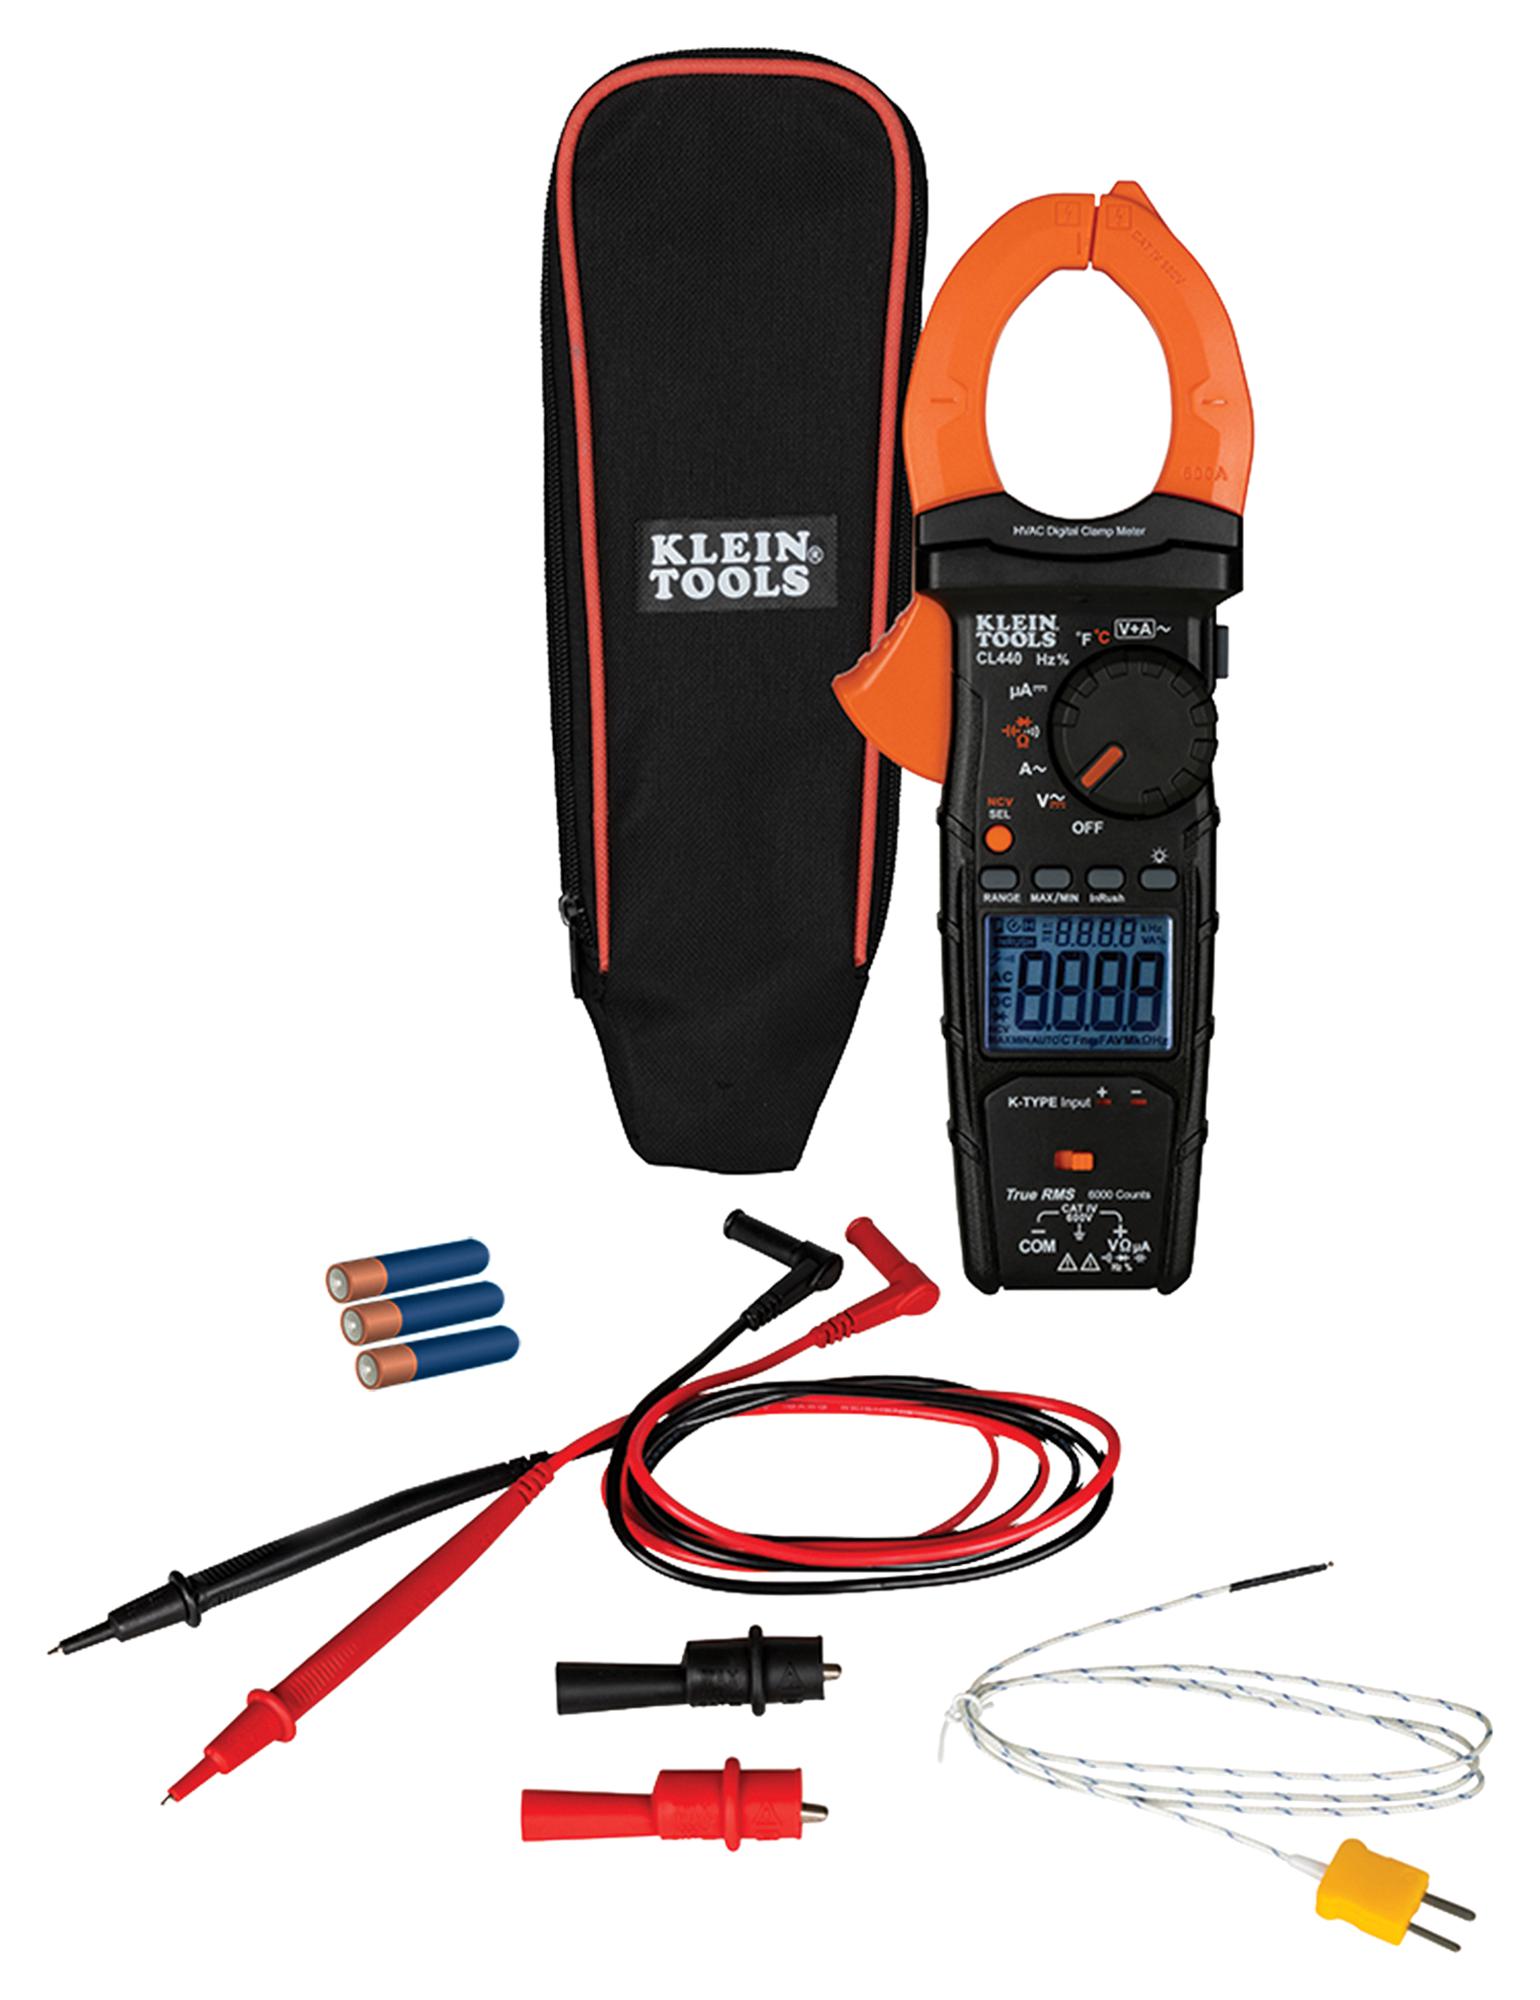 Klein Tools Cl440 Clamp Meter, True Rms, 750V, 600A